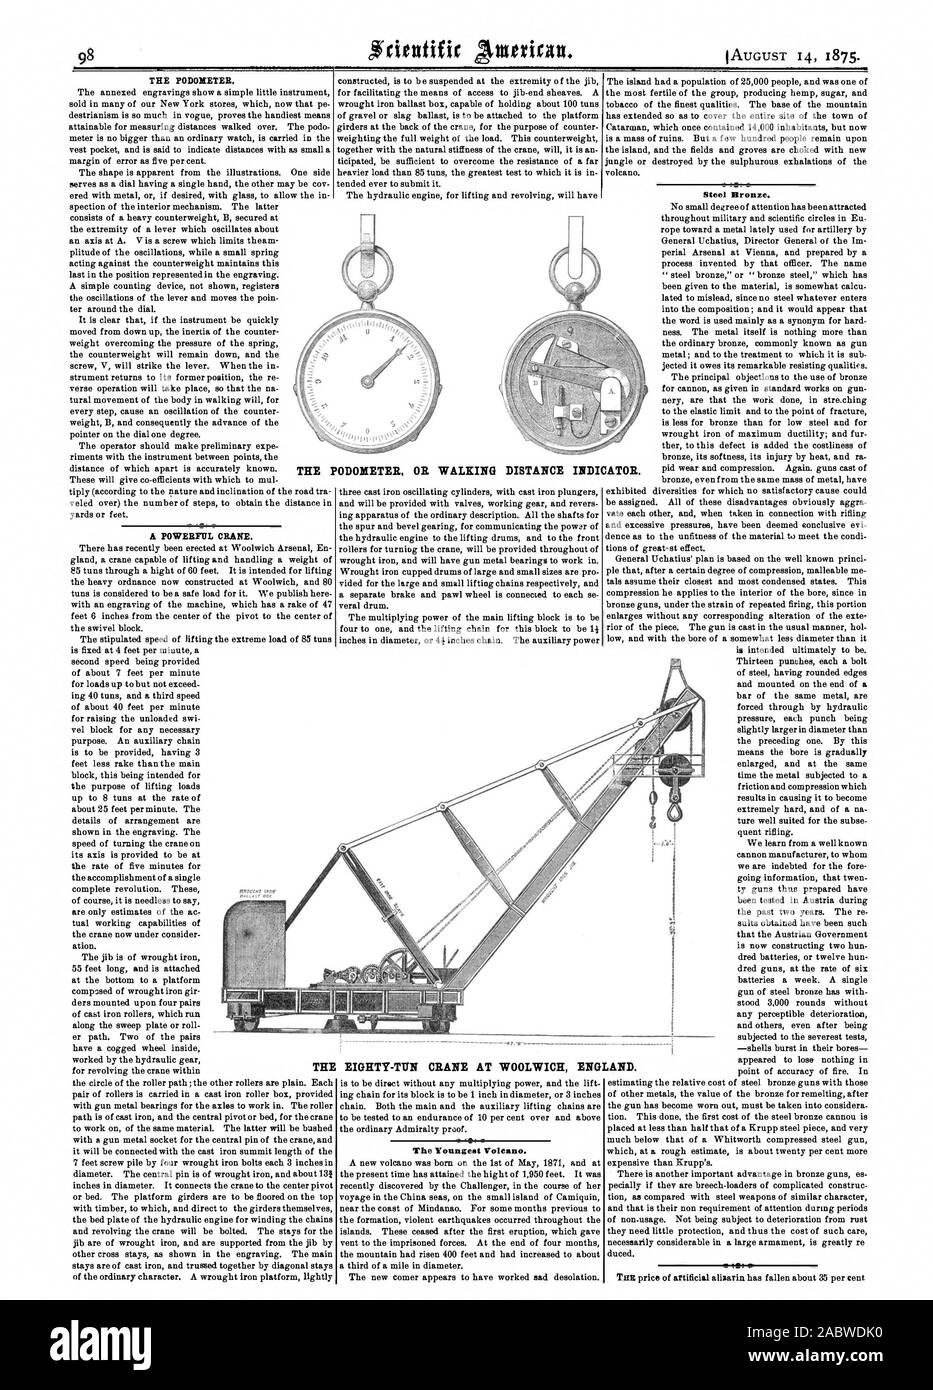 EIGHTY-TUN CRANE AT WOOLWICH EN The Youngest VolCano. Steel Bronze. THE THE PODOMETER OR WALKING DISTANCE INDI CATOR. LAND., scientific american, 1875-08-14 Stock Photo